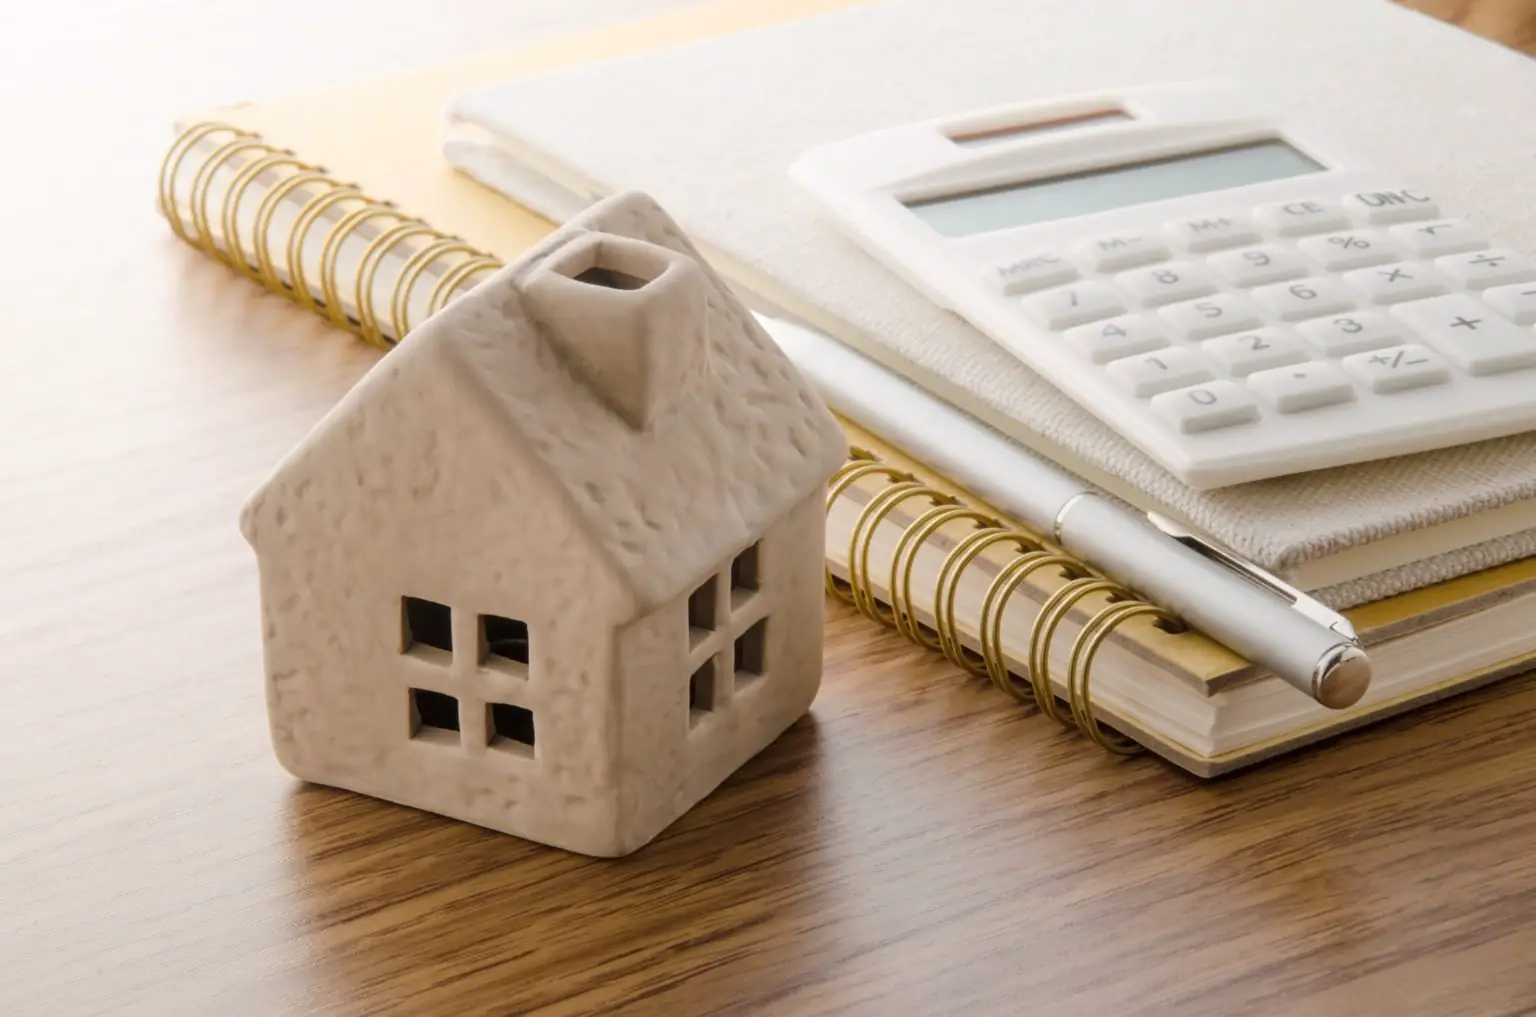 Are Mortgage Payment Calculators Accurate?